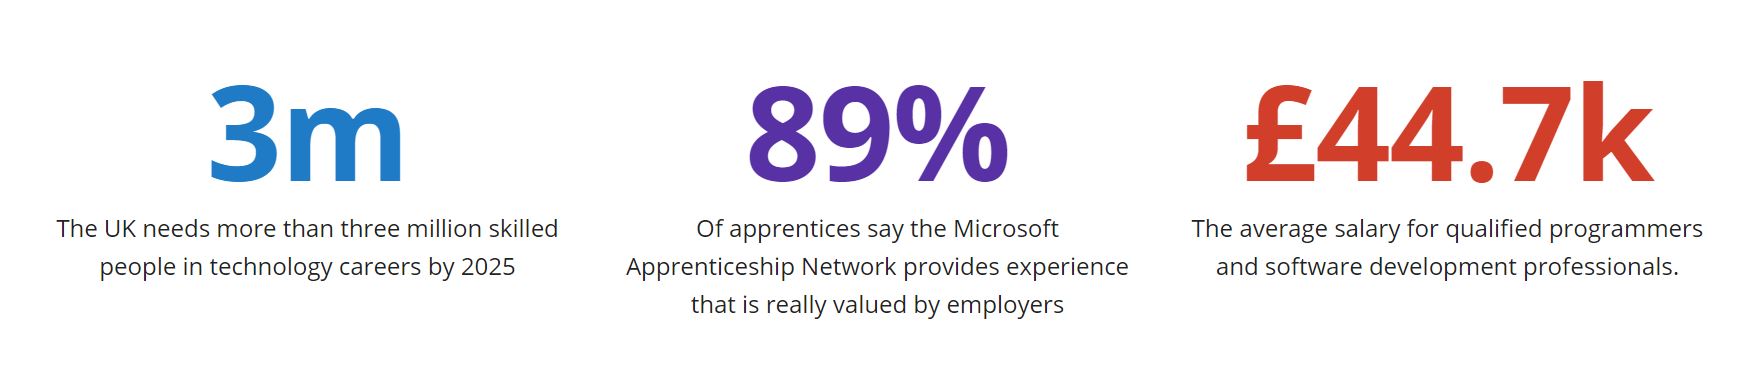 facts about apprenticeships